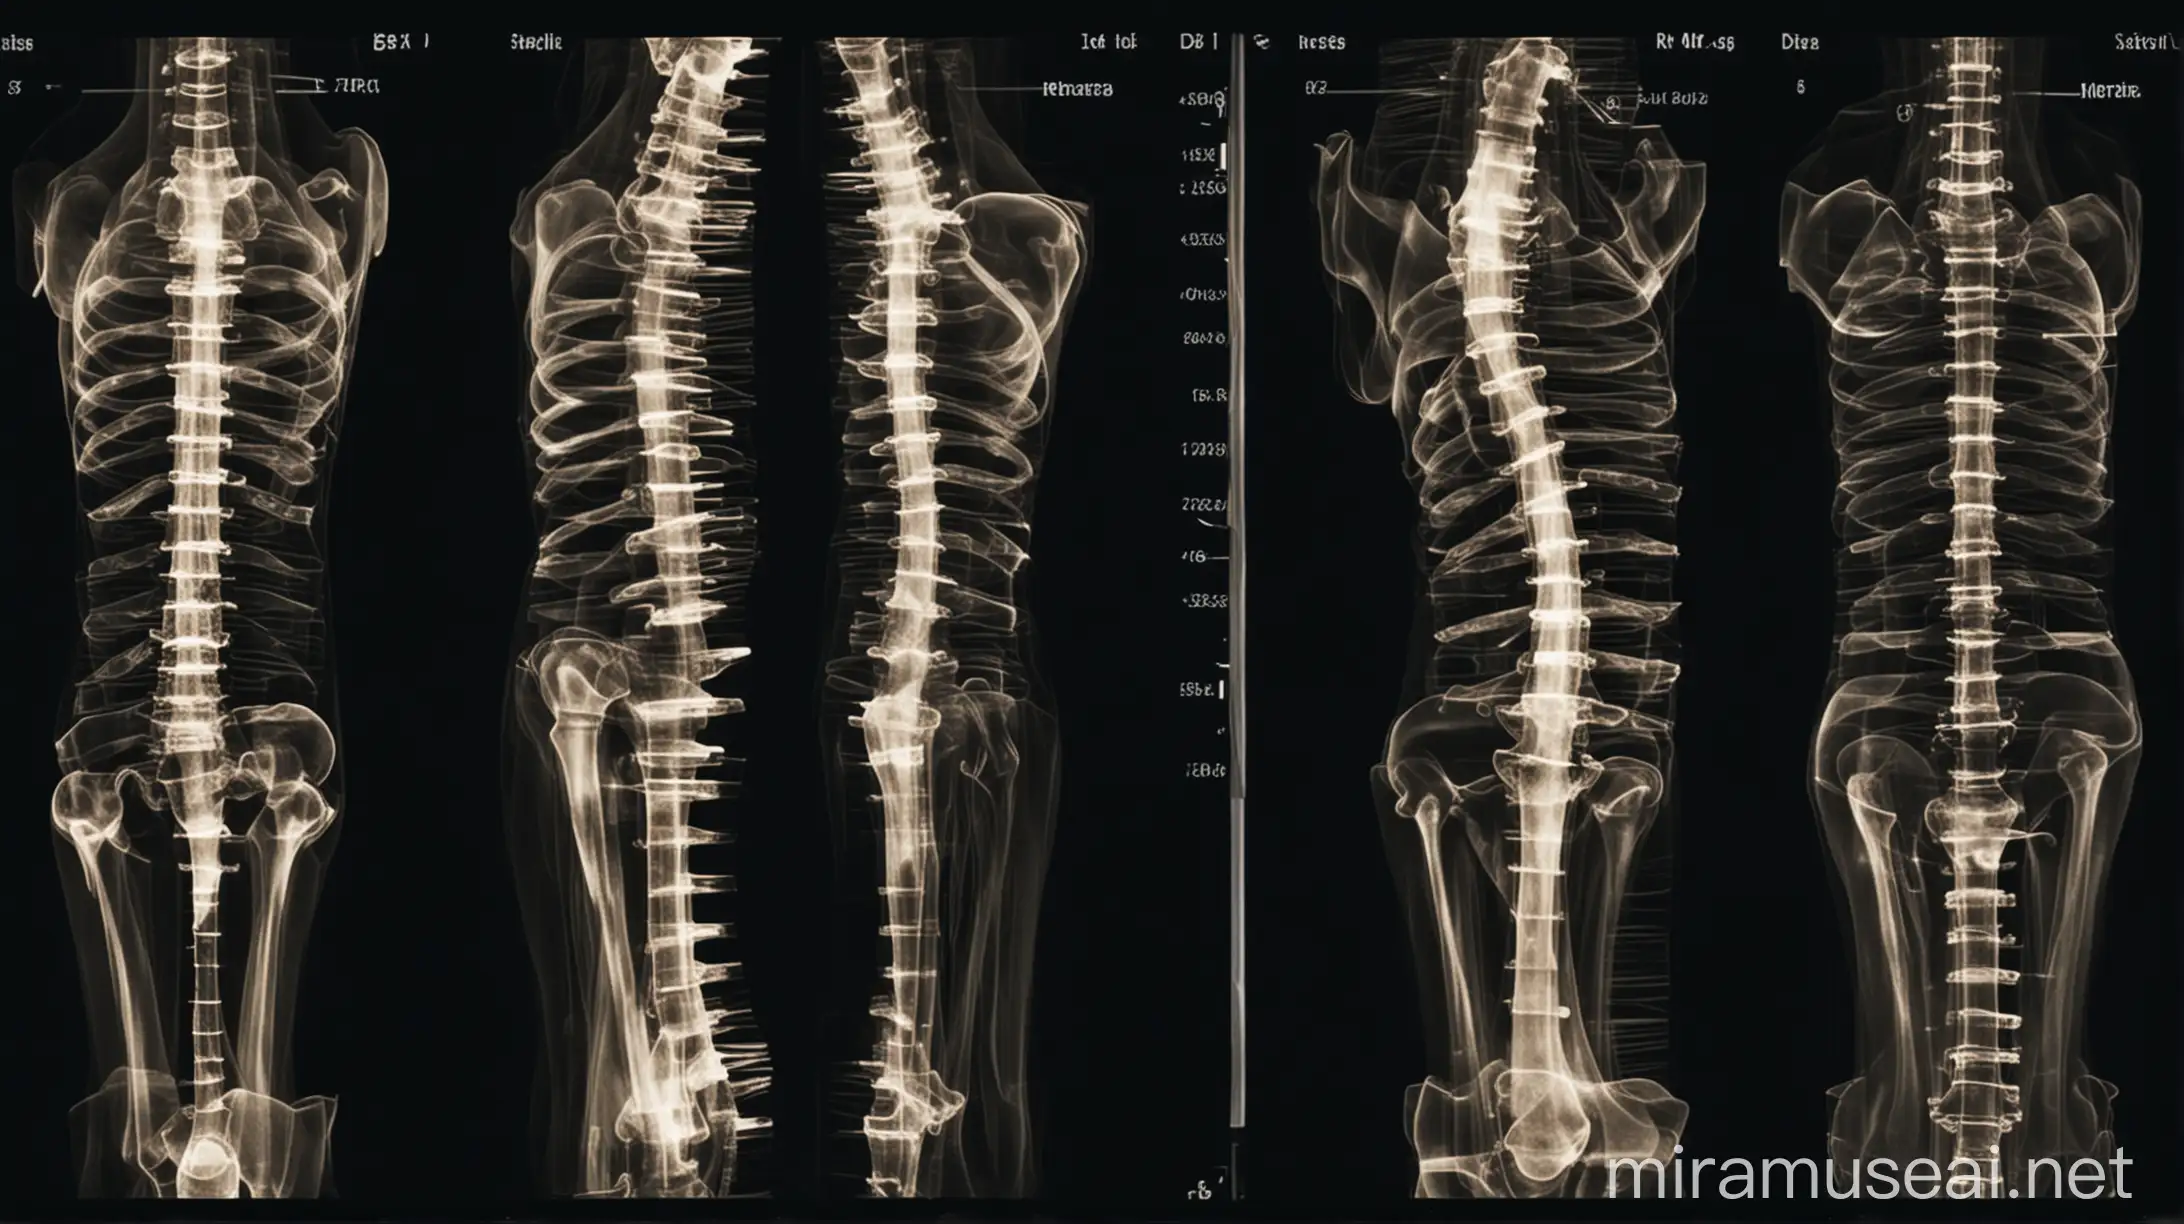 Medical Radiographic Imaging of Human Spine Showing Alignment